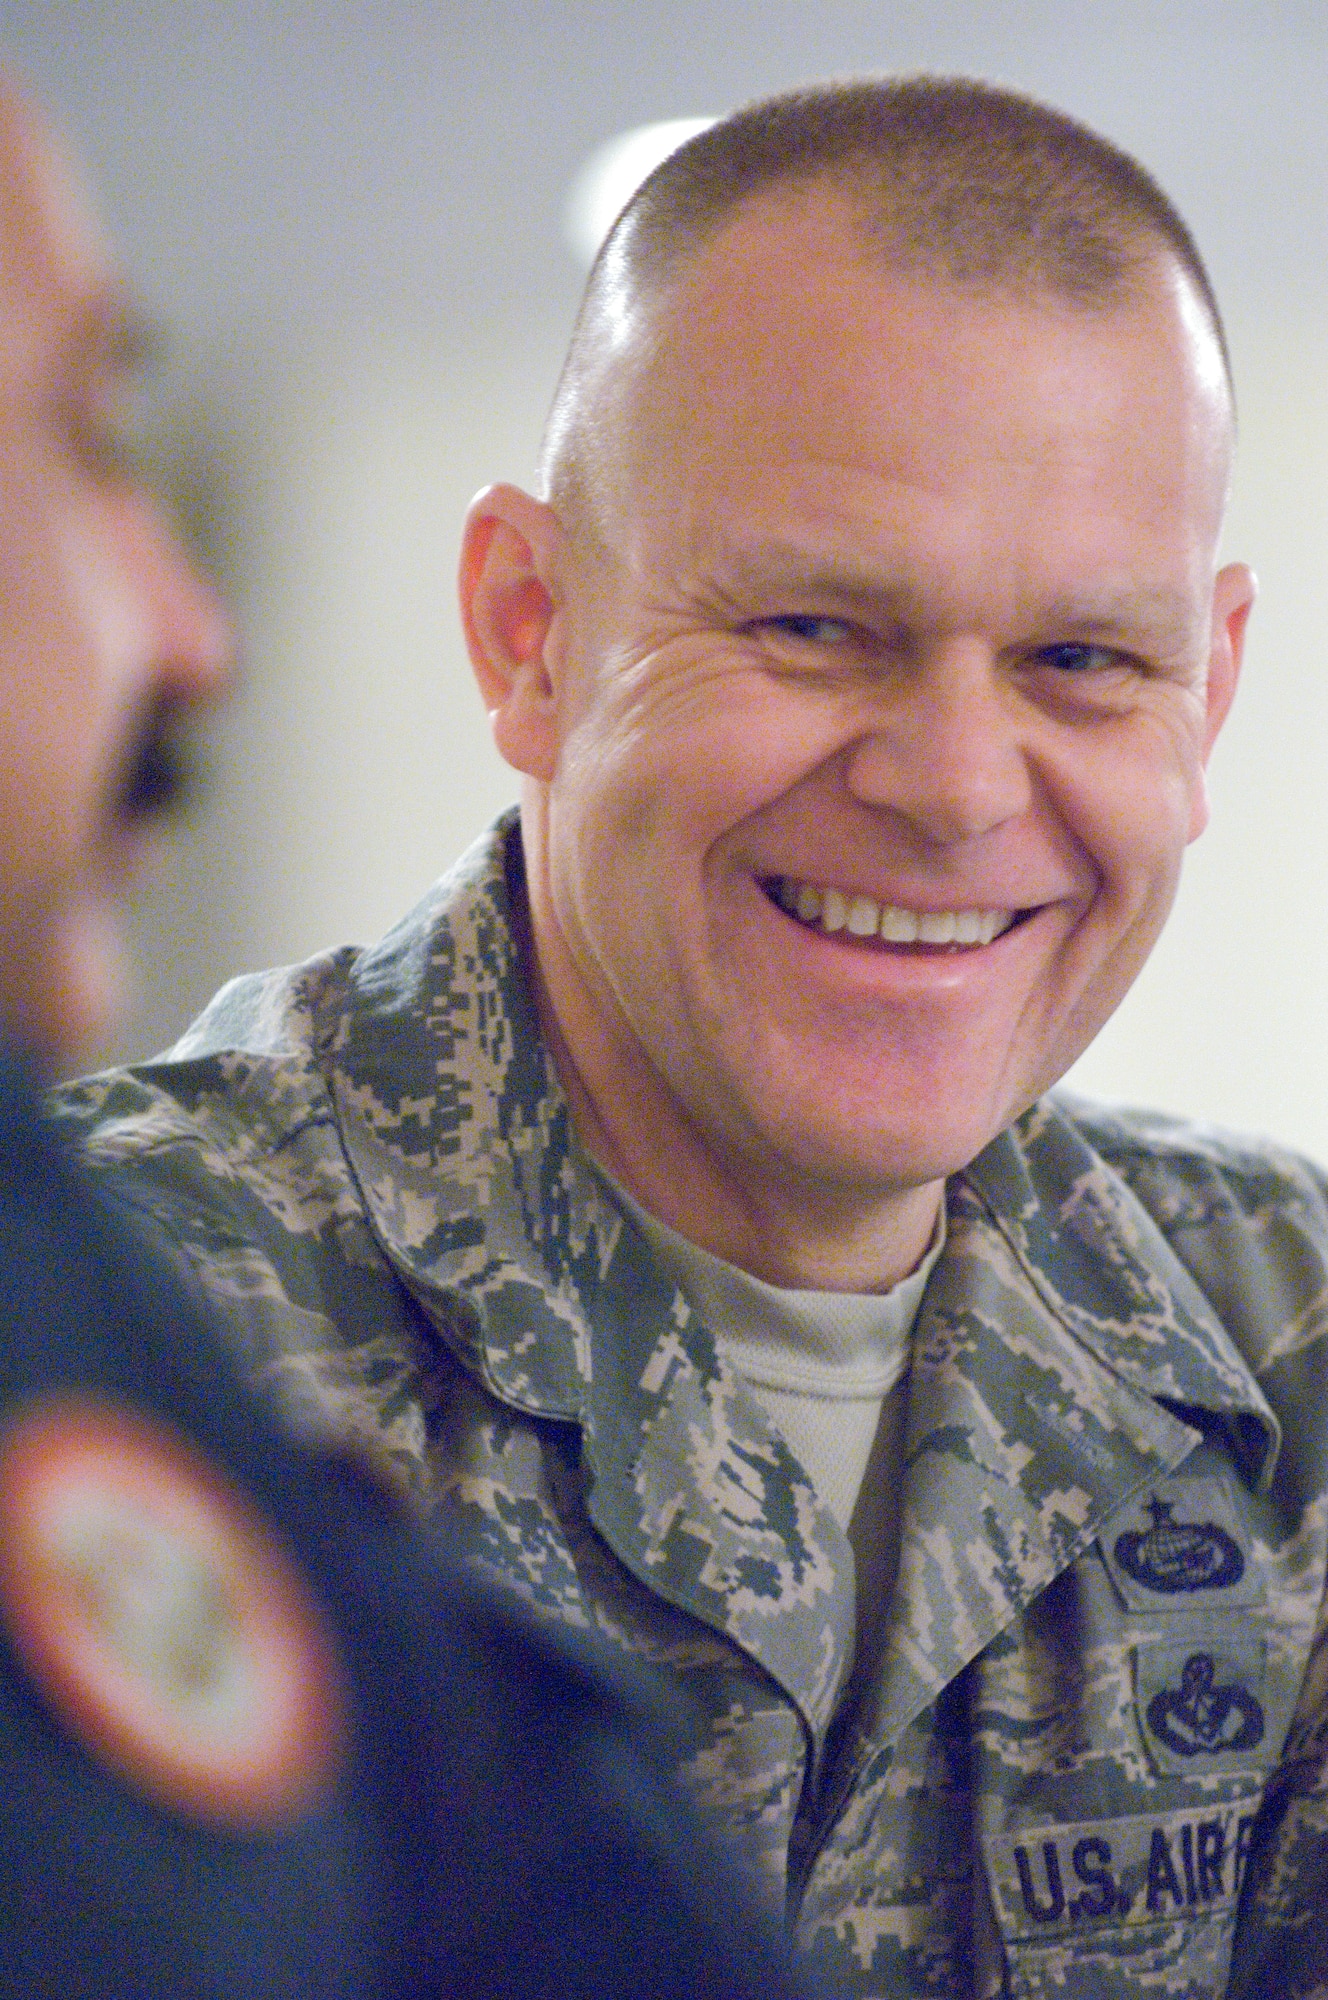 Chief Master Sgt. of the Air Force James Roy laughs with his counterpart, the Iraqi chief master sergeant of the Air Force, during lunch Dec. 7 at Maxwell Air Force Base, Ala. The Iraqi chief was in the States for the first time, visiting Air University and other Air Education and Training Command bases to observe and glean ideas concerning how the U.S. Air Force educates and trains its Airmen for the duration of their careers. (U.S. Air Force photo/Melanie Rodgers Cox)